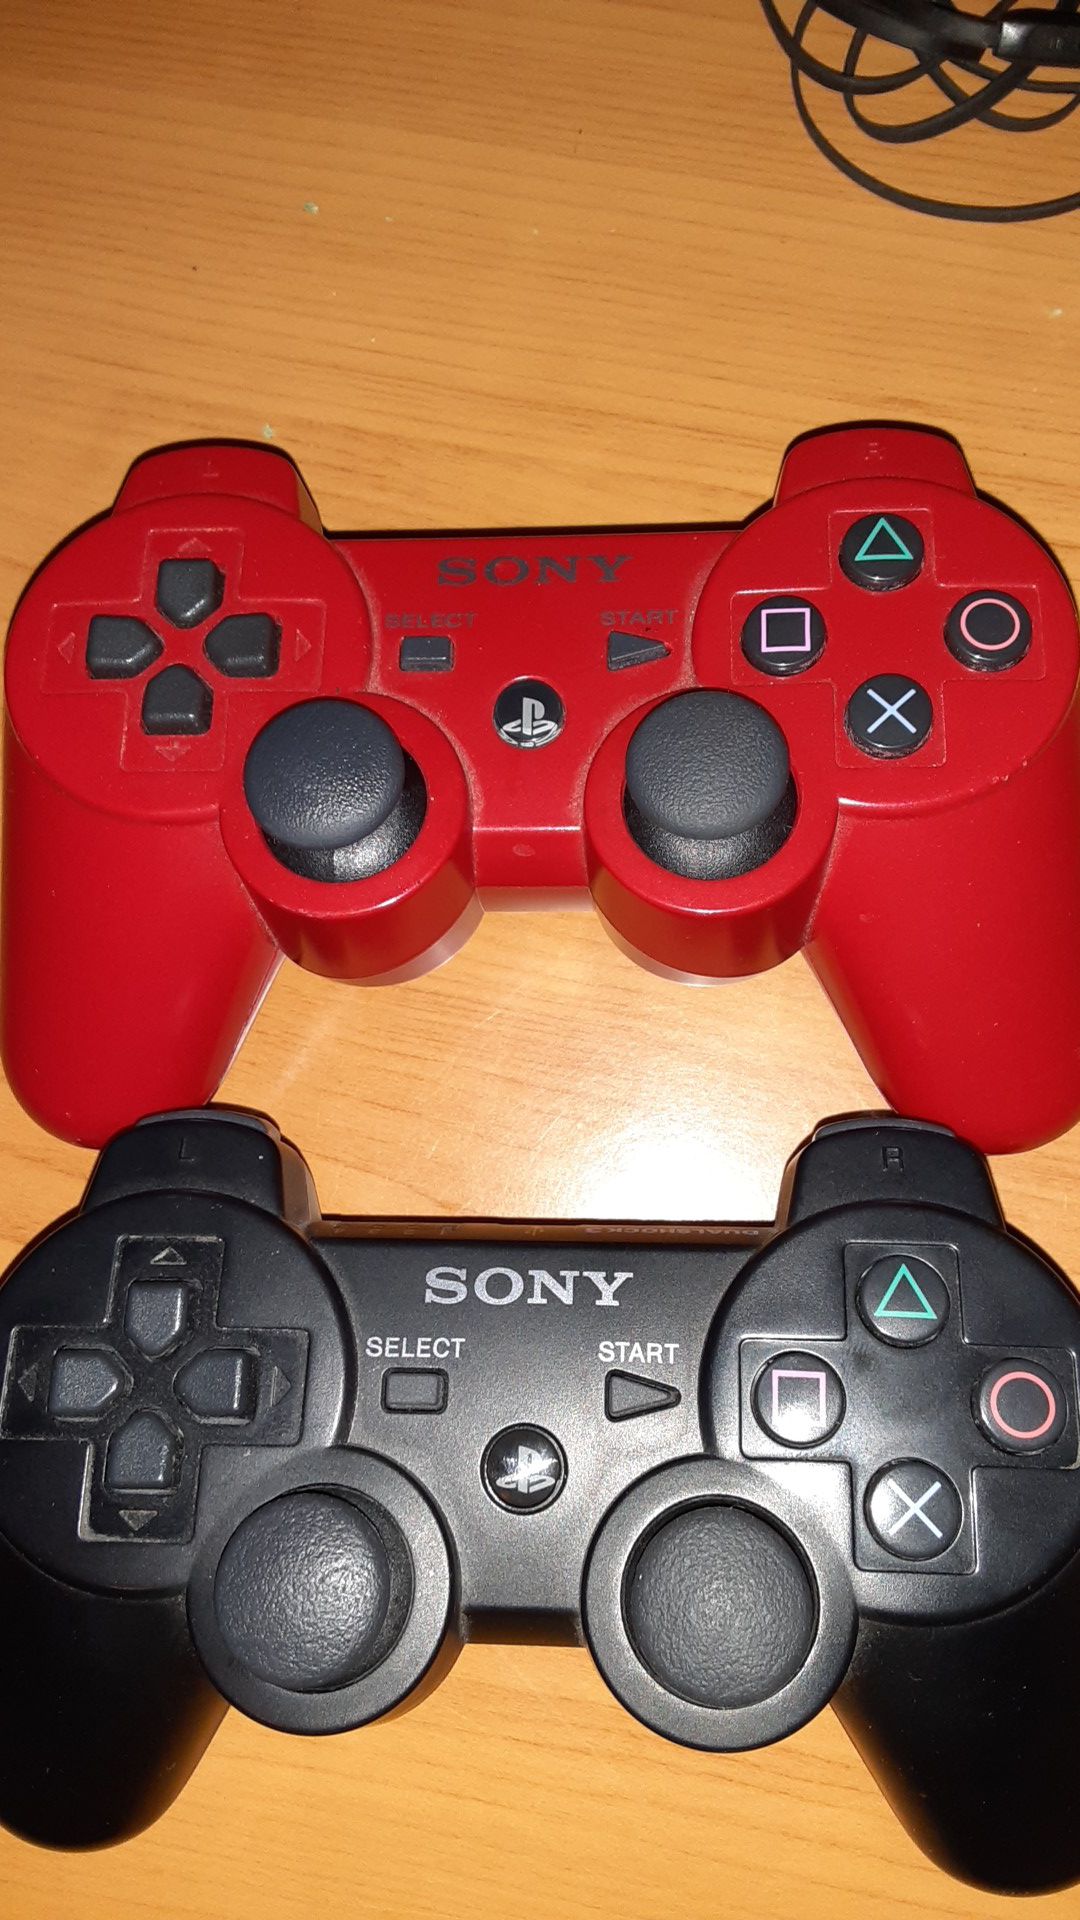 2 working Ps3 controllers for sale give me an offer